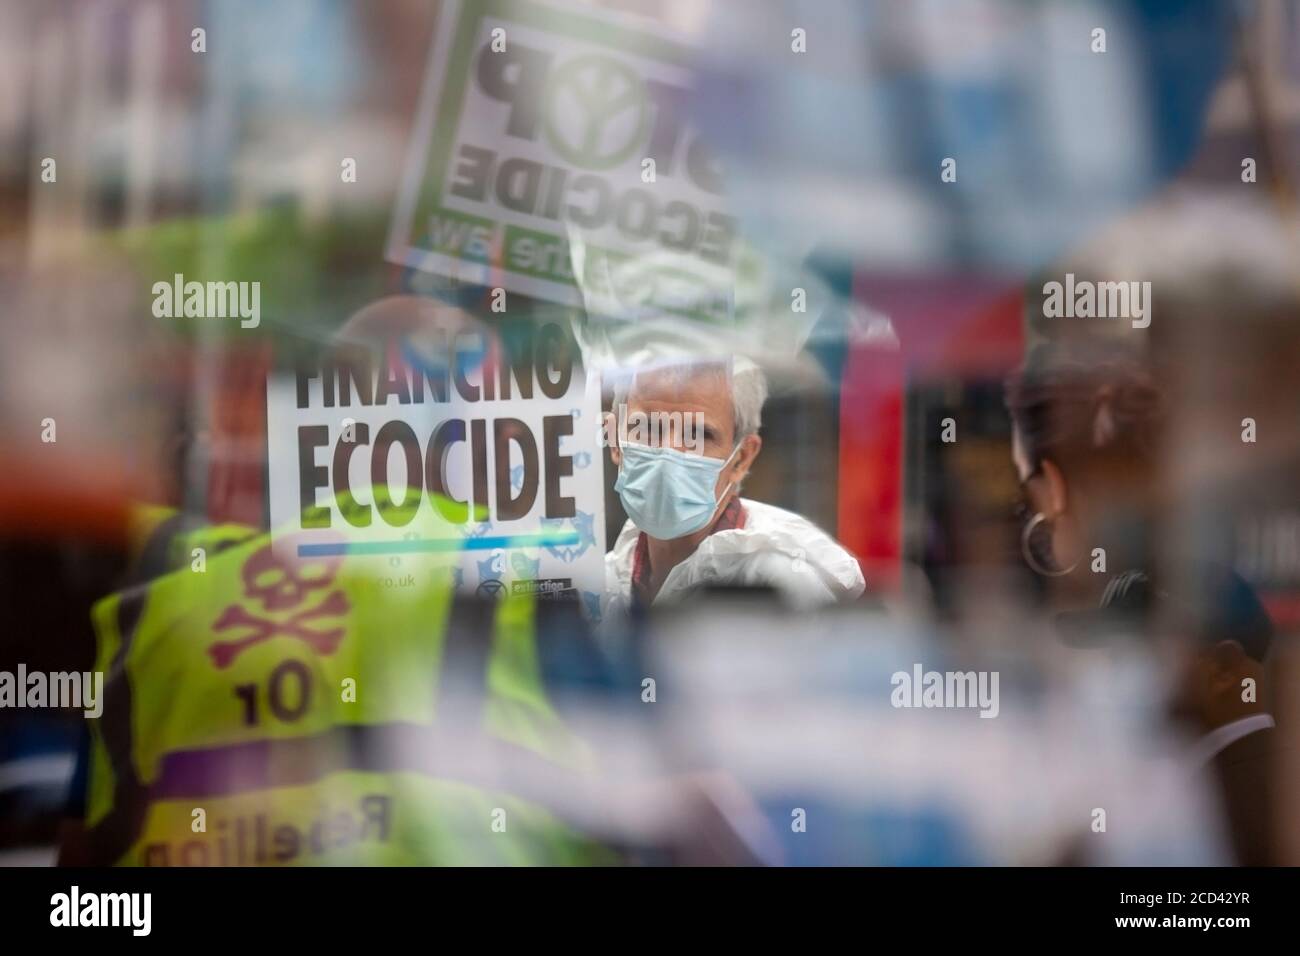 London, UK. 26th August 2020. Extinction Rebellion members protest outside Barclays Bank, Clapham Junction, South London. XR continue their ’Sharklays’ campaign, investigating Barclays Bank for crimes against humanity and the planet. XR state that Barclays is now the biggest European investor in fossil fuels. Credit: Neil Atkinson/Alamy Live News Stock Photo